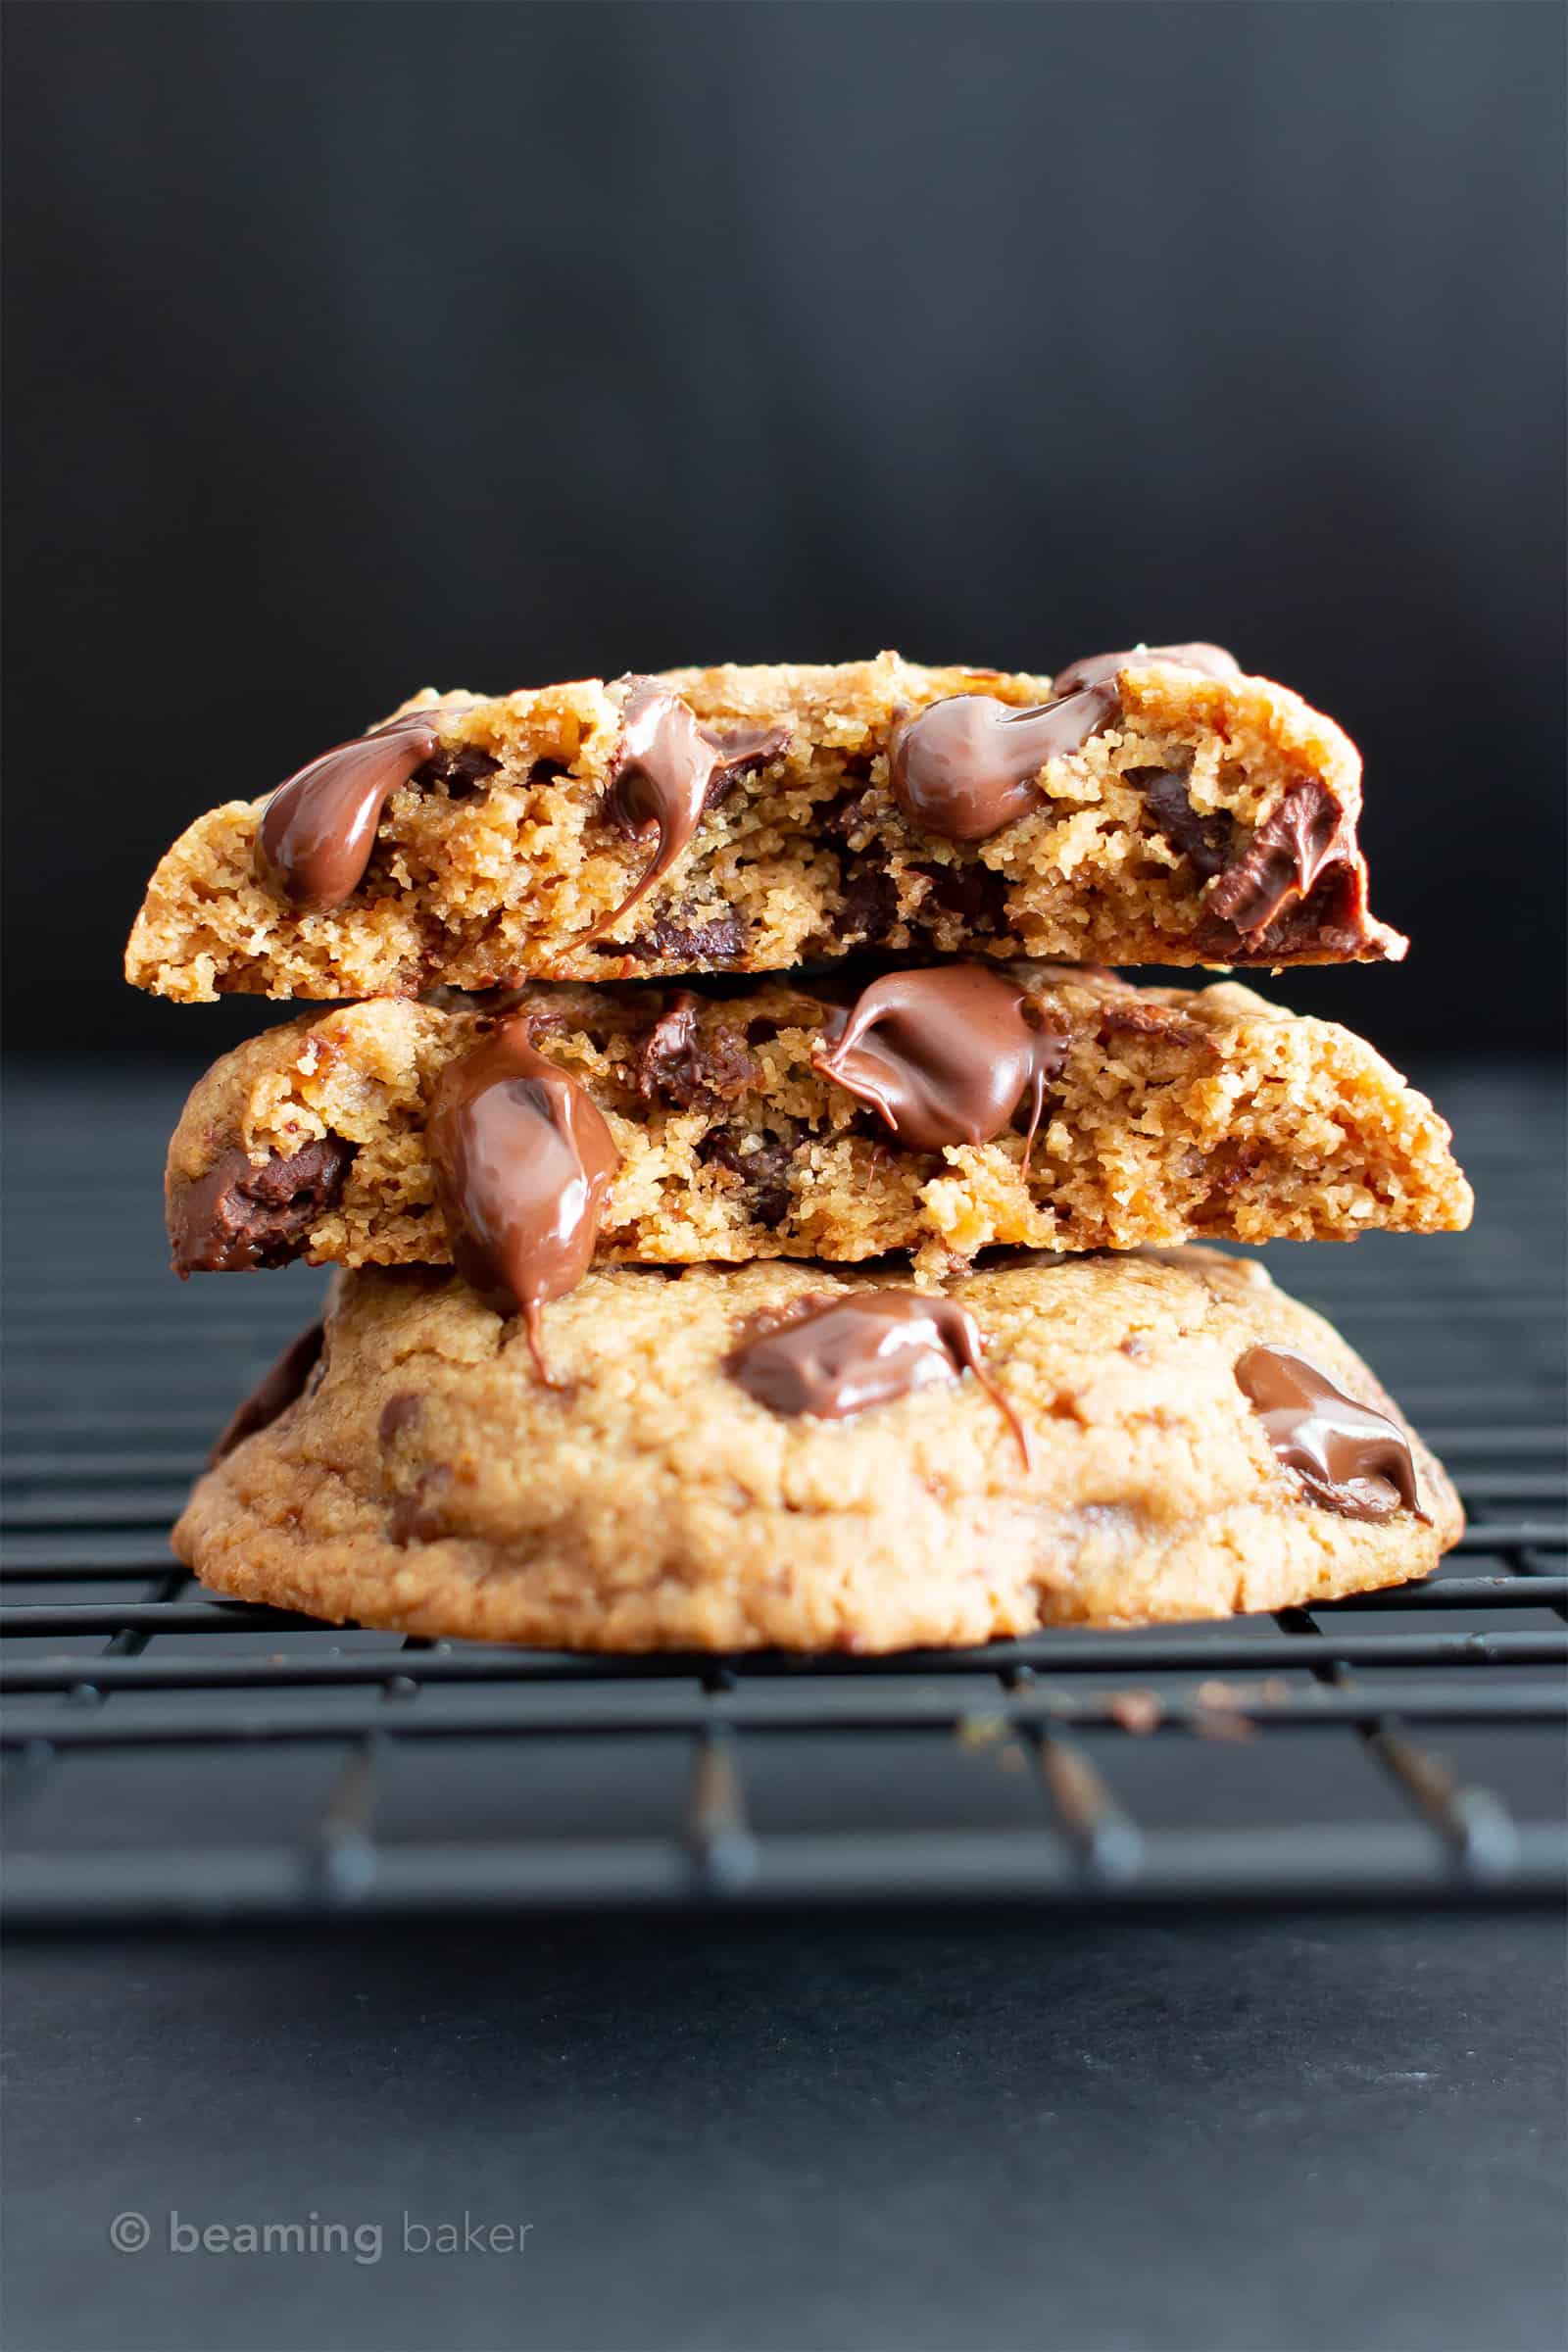 Thick and Chewy Vegan Chocolate Chip Cookies Recipe: the best vegan chocolate chip cookies—gluten free, delicious, easy! Thick chocolate chip cookies with crispy edges, chewy, soft centers, bursting with chocolate! #GlutenFree #Vegan #Chocolate #Cookies | Recipe at BeamingBaker.com